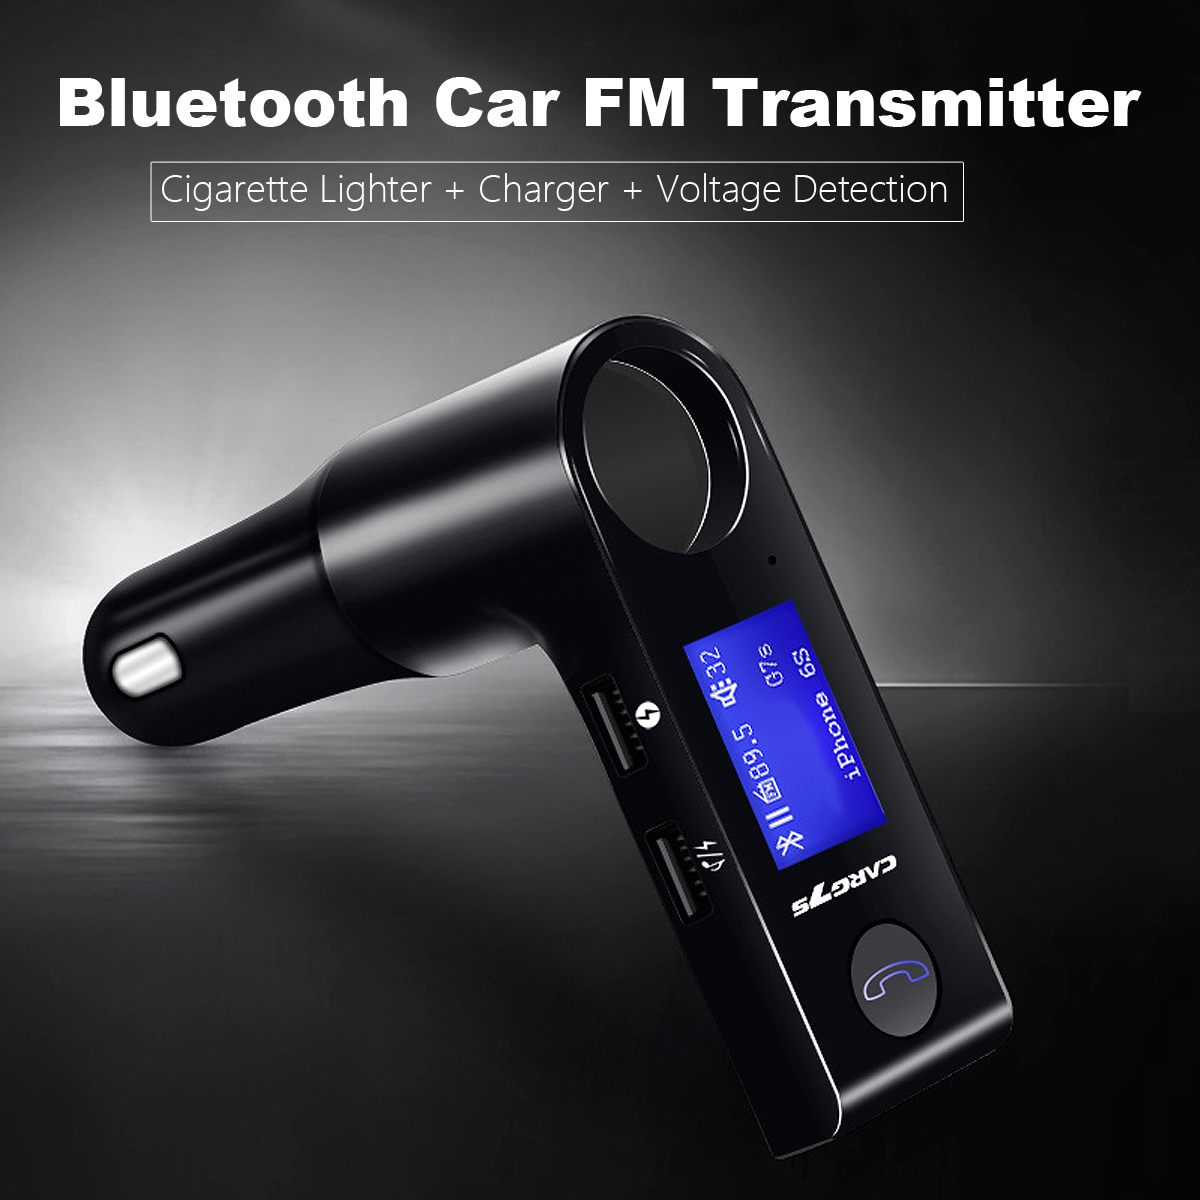 G7S-12-24V-bluetooth-Car-FM-Transmitter-Wireless-Radio-Adapter-USB-Charger-MP3-Player-1257589-1